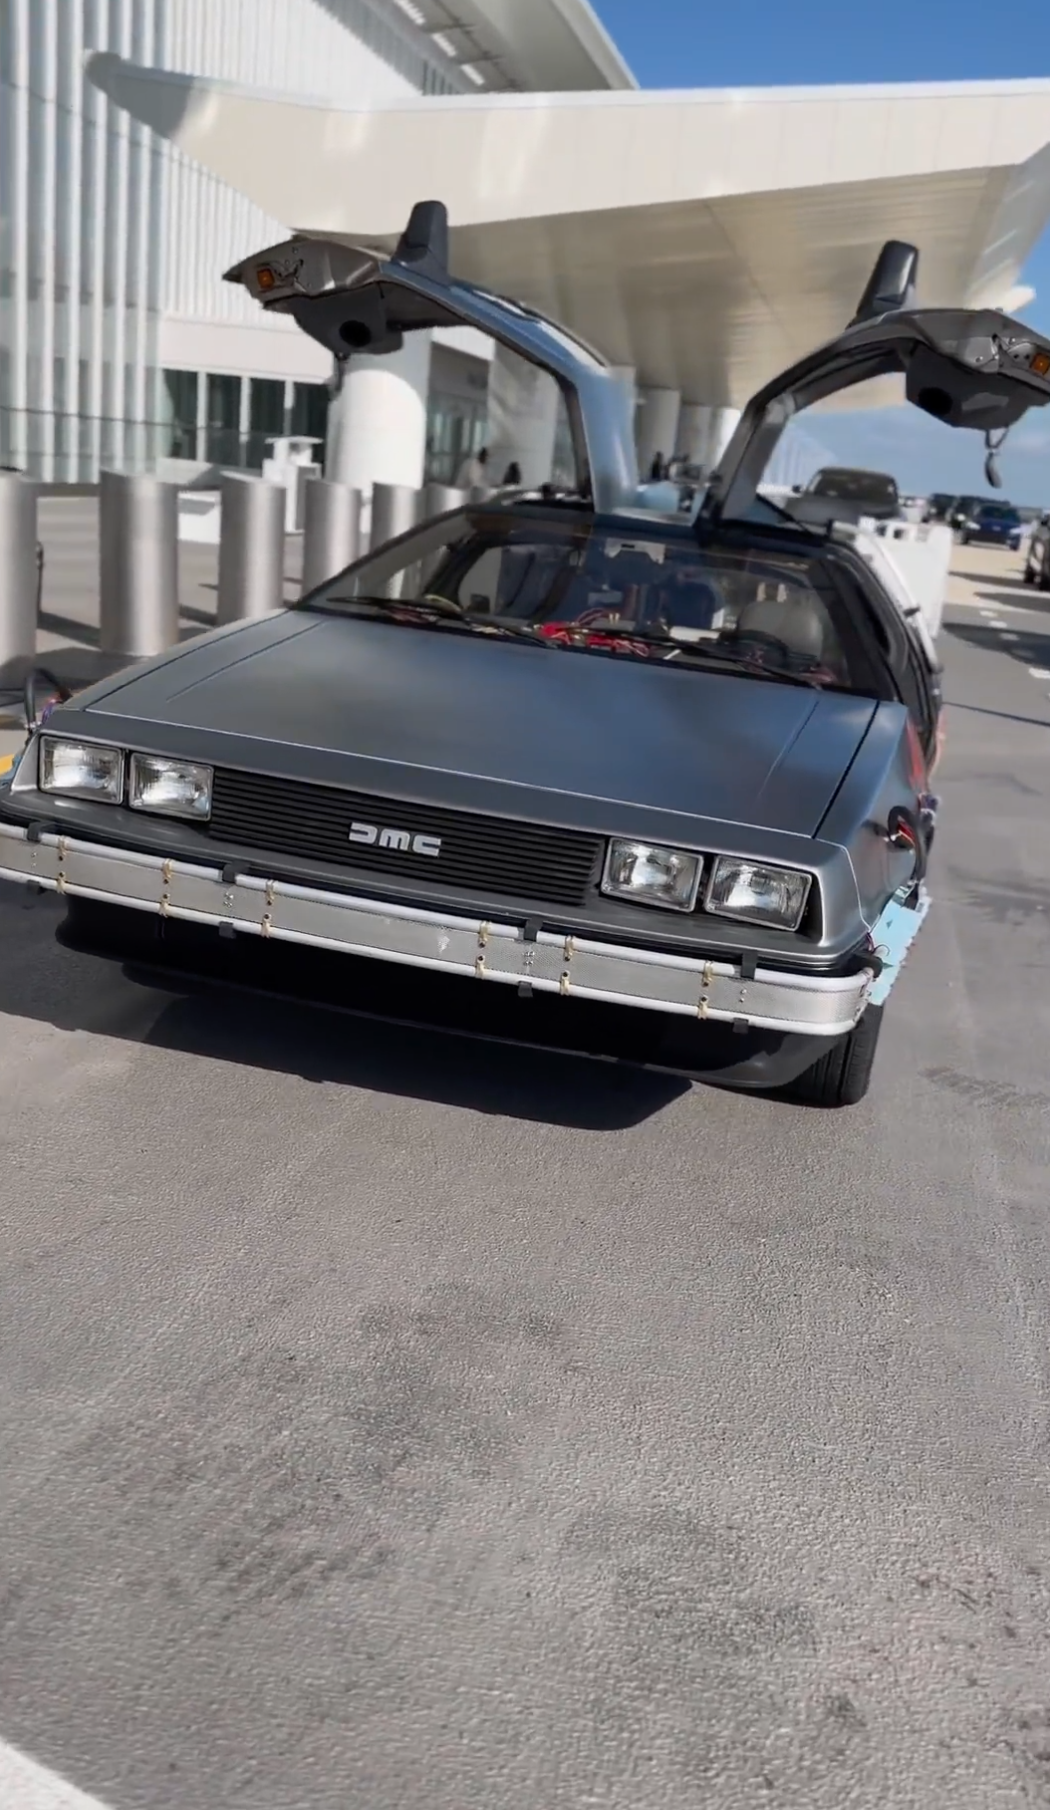 The Back to the Future DeLorean has made its way to MCO! 🚗💨